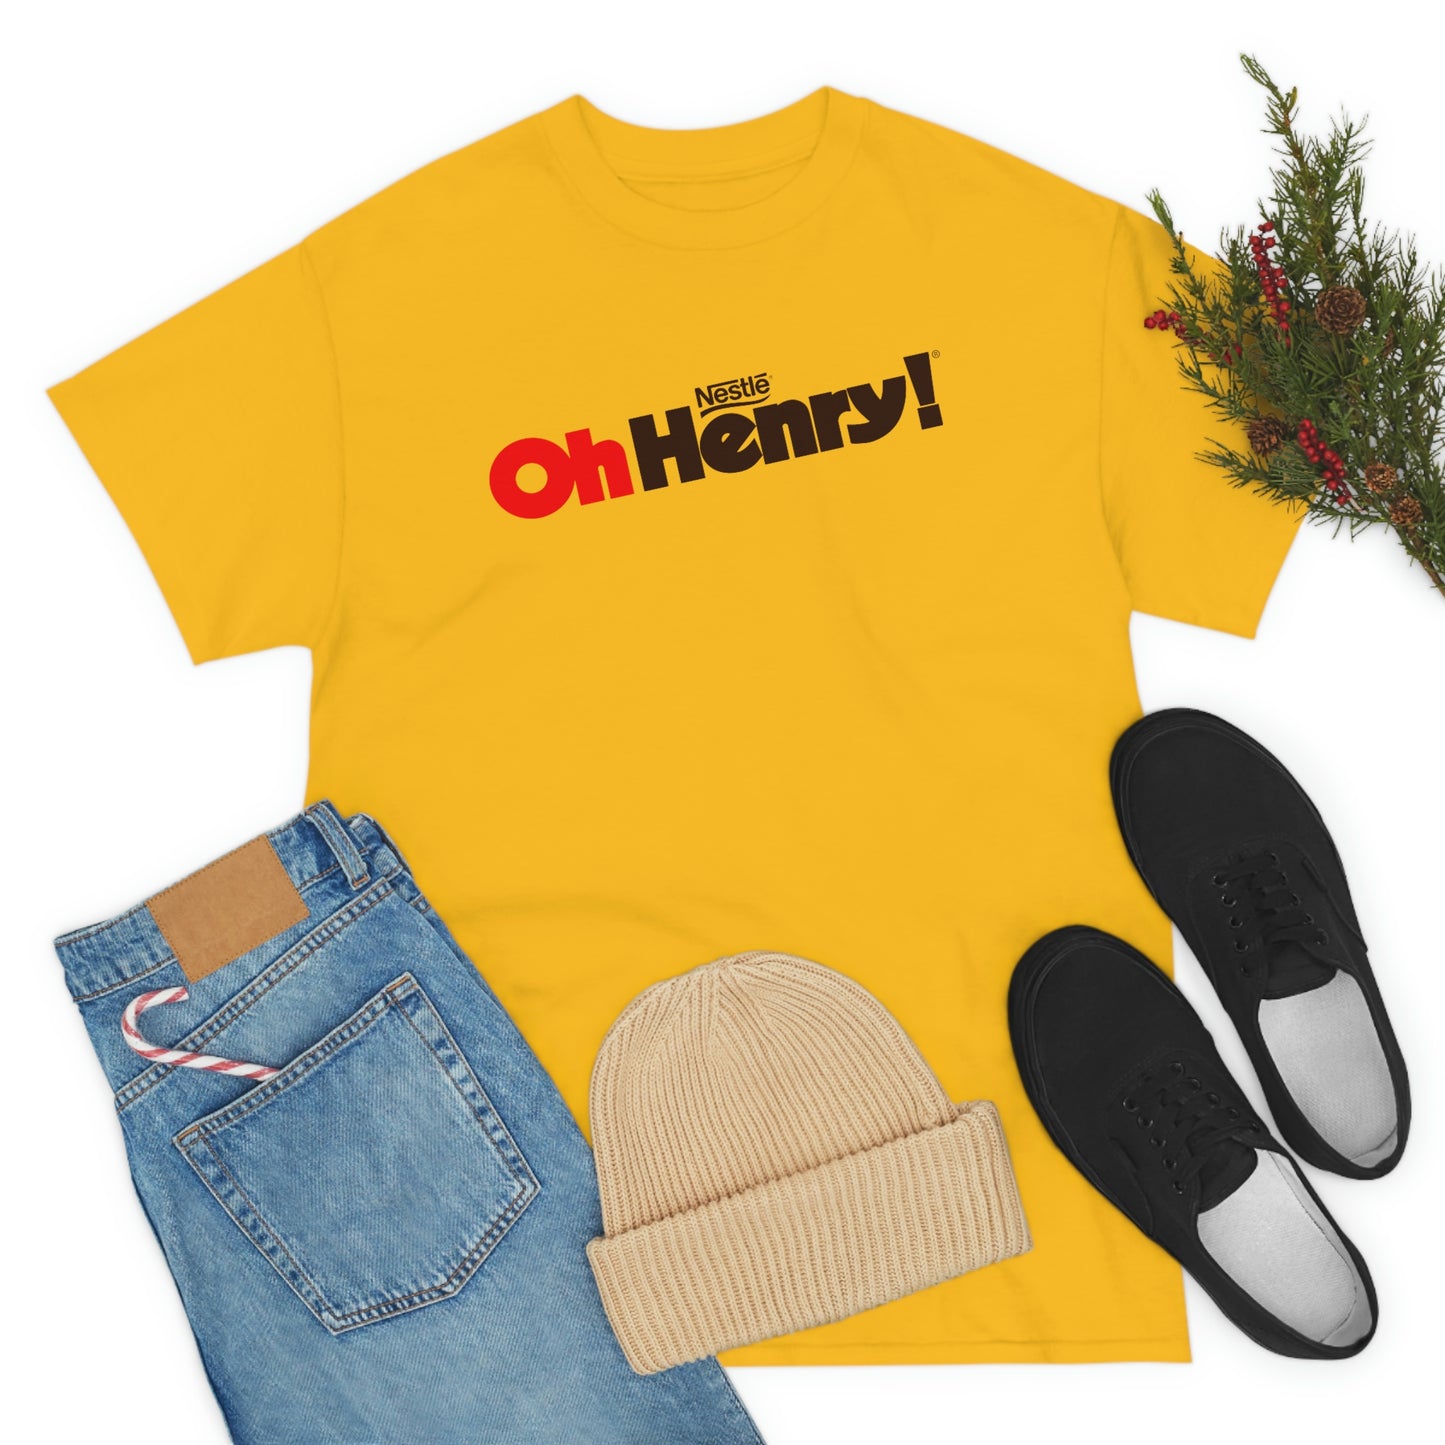 OH Henry T-Shirt